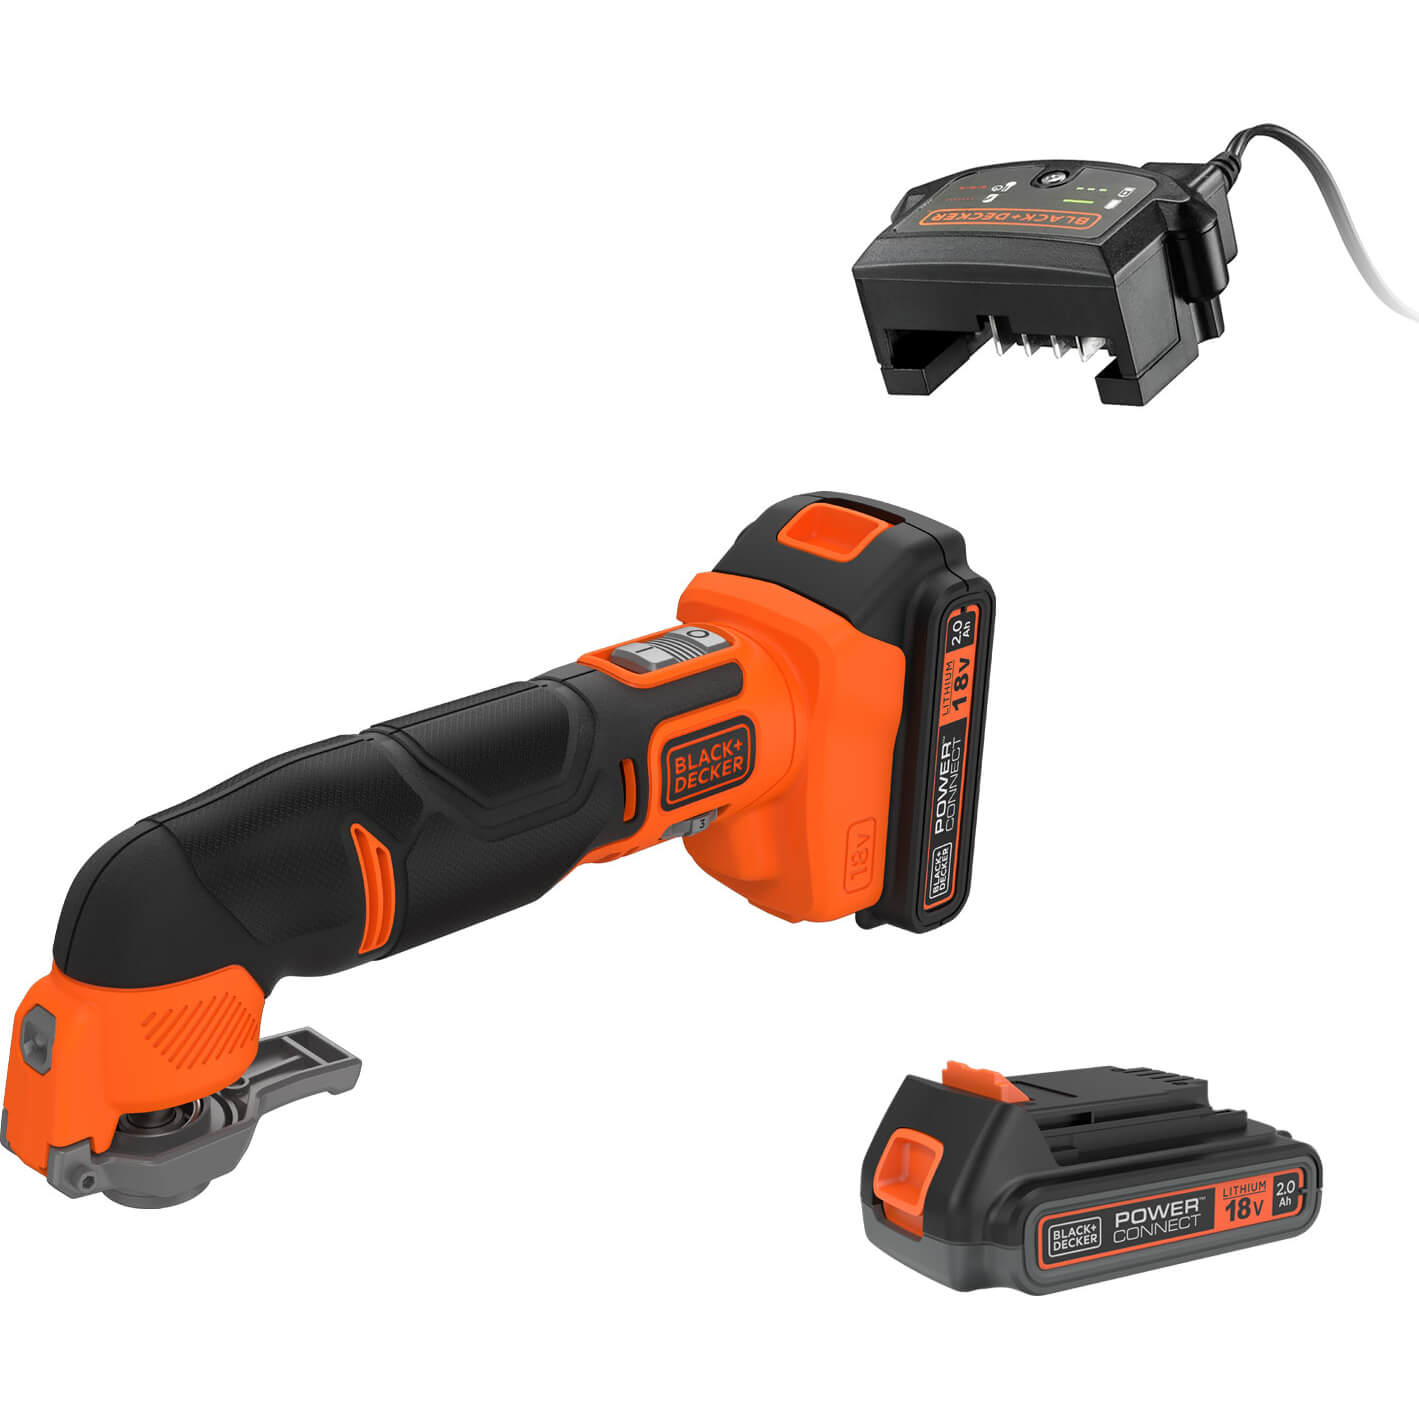 Black and Decker BDCOS18 18v Cordless Oscillating Multi Tool 2 x 2ah Li-ion Charger Case & Accessories